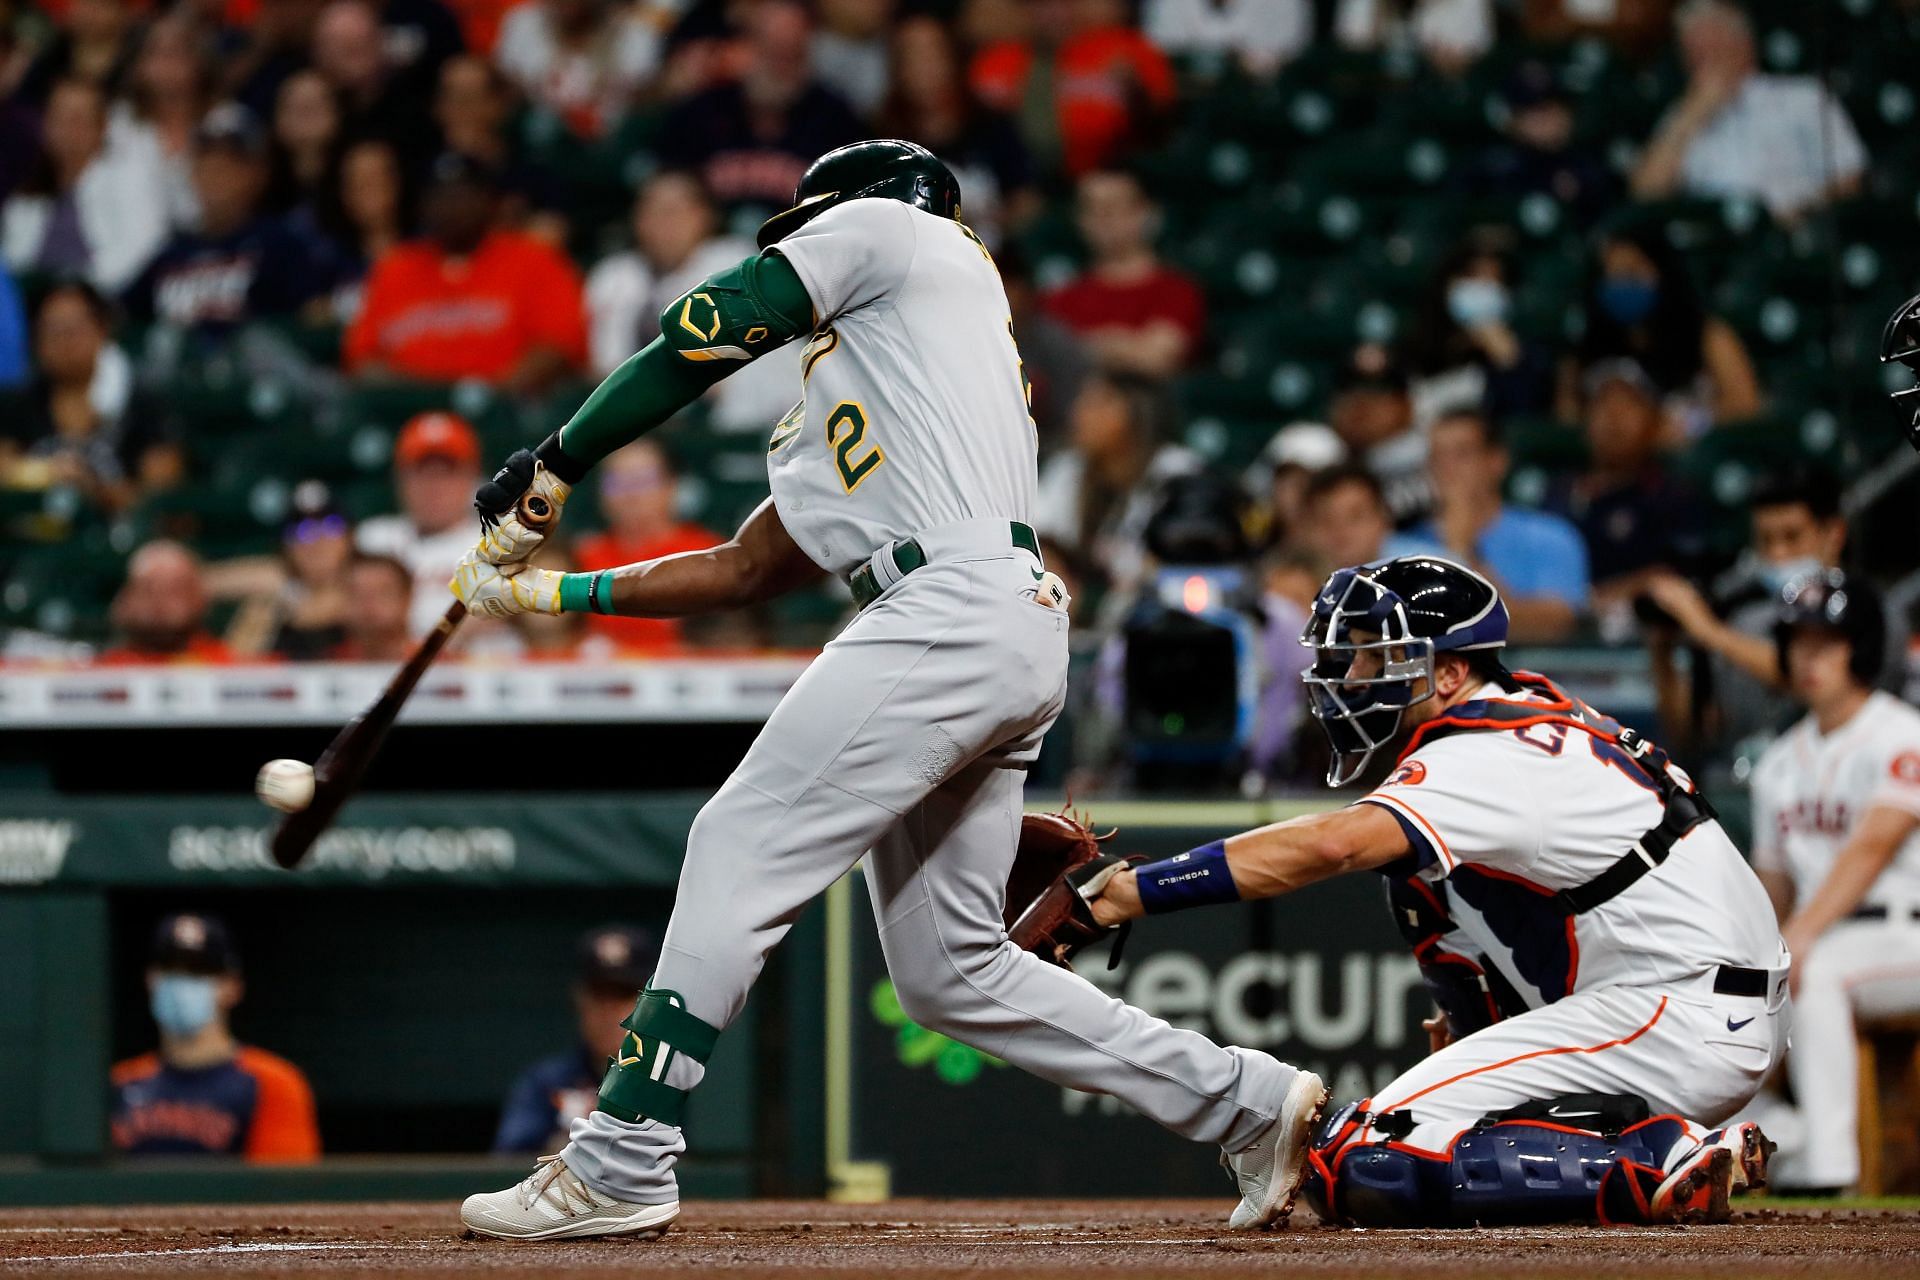 Starling Marte makes contact with a pitch during a Oakland Athletics v Houston Astros game.